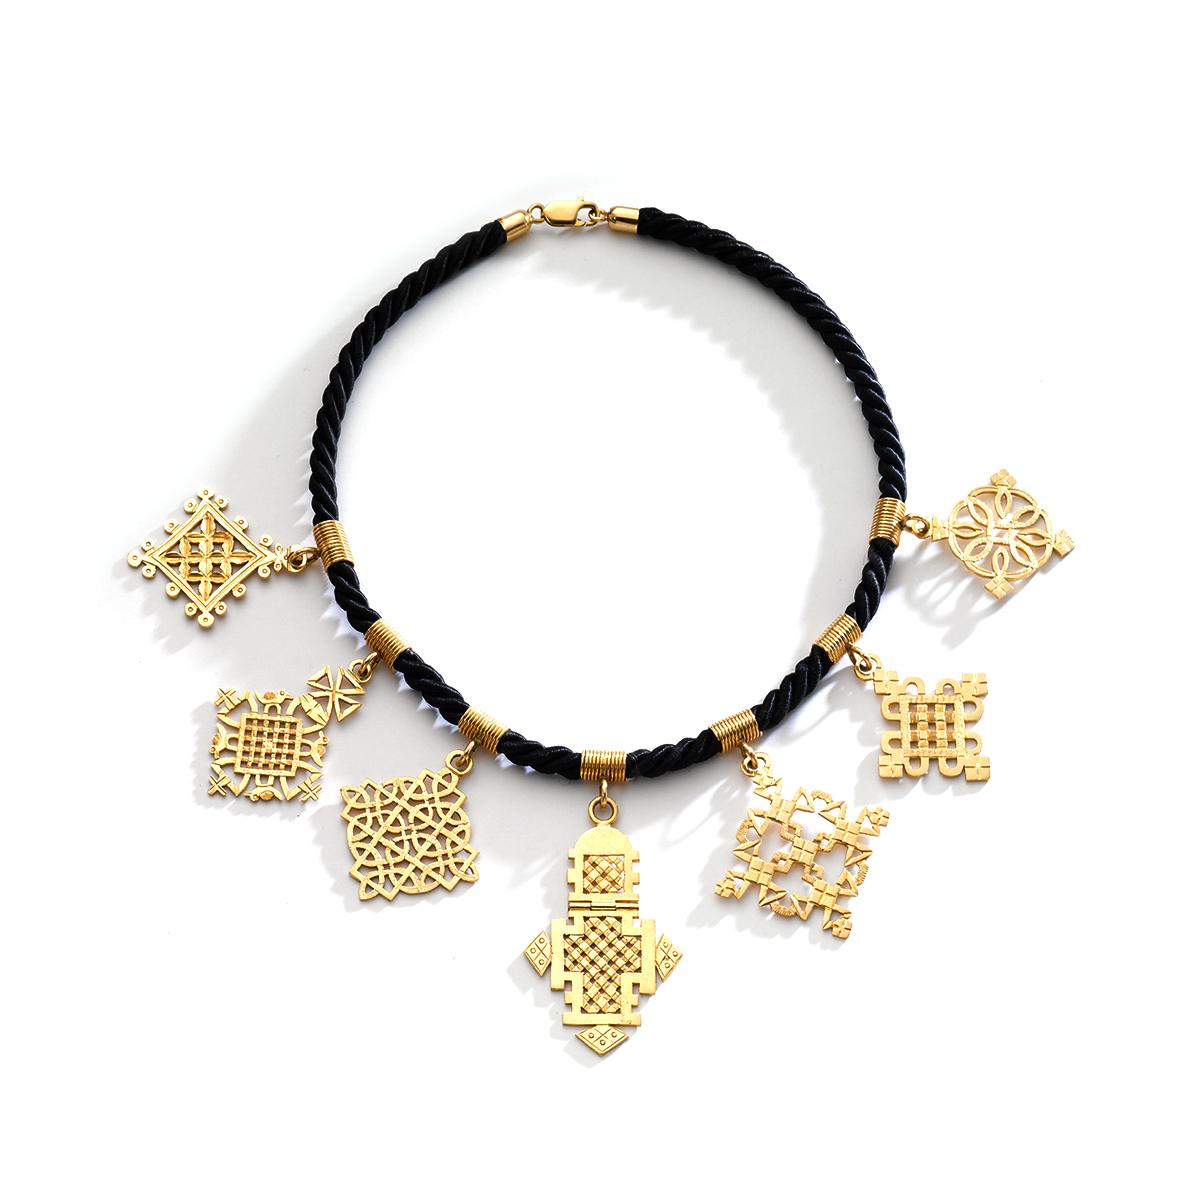 Seven Ethiopian Coptic Cross yellow gold 18k Pendants Necklace. Each Pendant is attached to a black cord with yellow gold clasp.

Total length: 15.75 inches (40.00 centimeters).
Pendants total height: from 1.57 to 2.56 inches 
(4.00 to 6.50